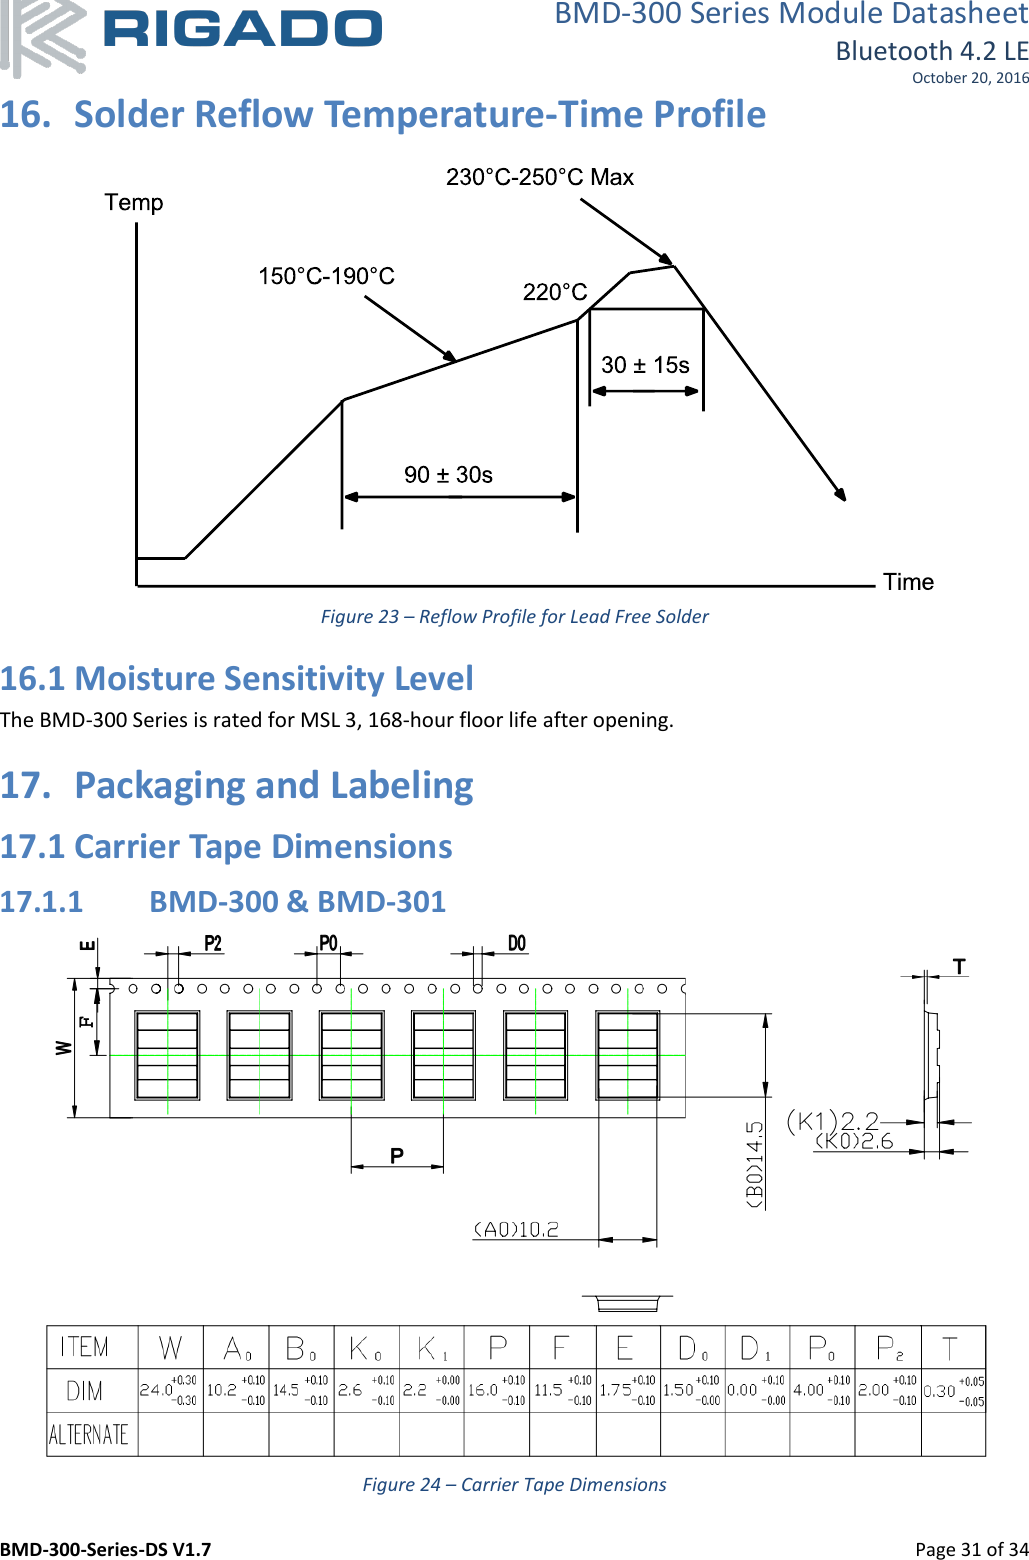 BMD-300 Series Module Datasheet Bluetooth 4.2 LE October 20, 2016 BMD-300-Series-DS V1.7         Page 31 of 34 16. Solder Reflow Temperature-Time Profile  Figure 23 – Reflow Profile for Lead Free Solder 16.1 Moisture Sensitivity Level The BMD-300 Series is rated for MSL 3, 168-hour floor life after opening. 17. Packaging and Labeling 17.1 Carrier Tape Dimensions 17.1.1 BMD-300 &amp; BMD-301  Figure 24 – Carrier Tape Dimensions 